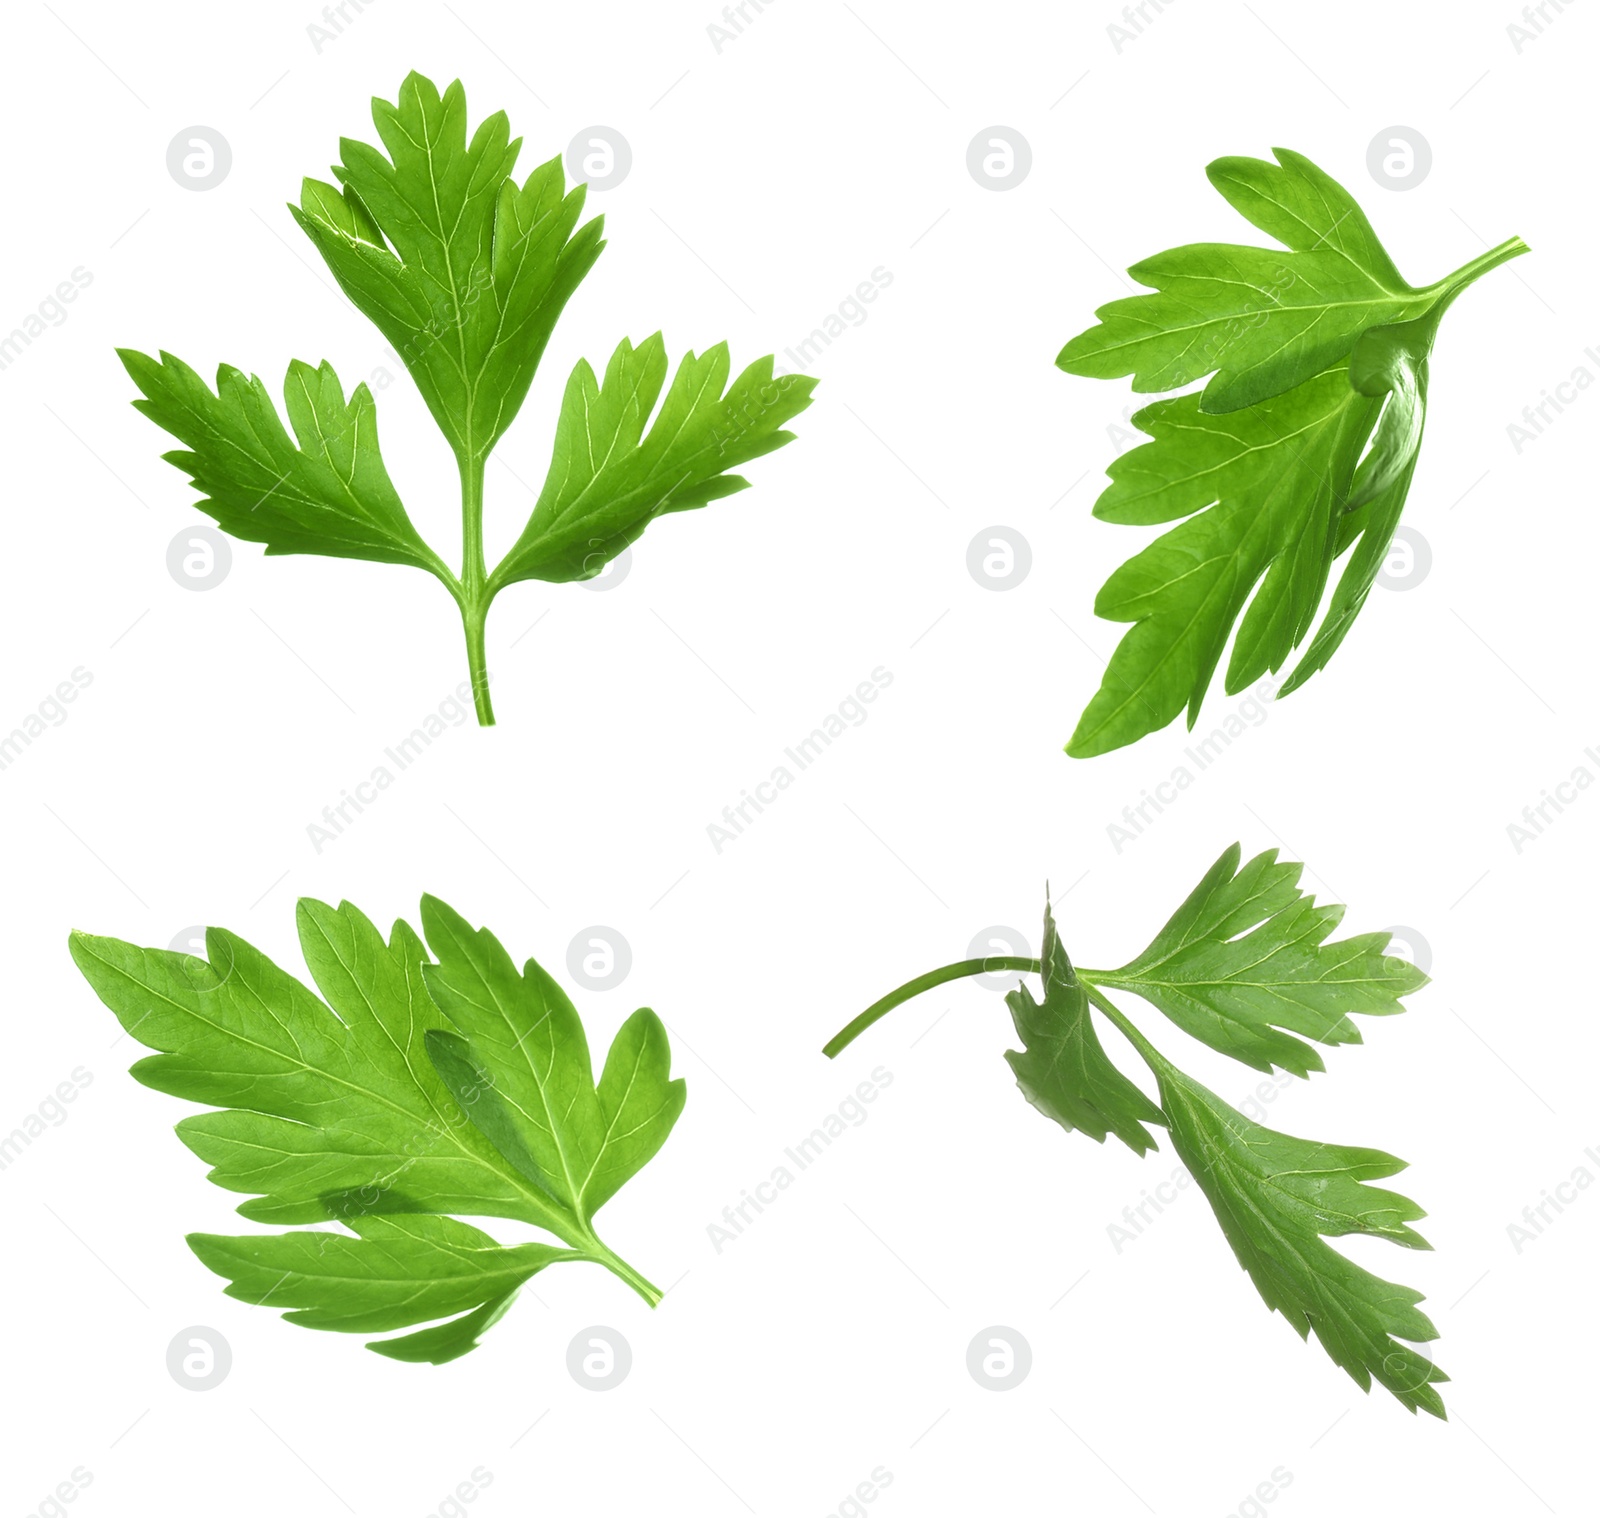 Image of Set with green parsley leaves on white background